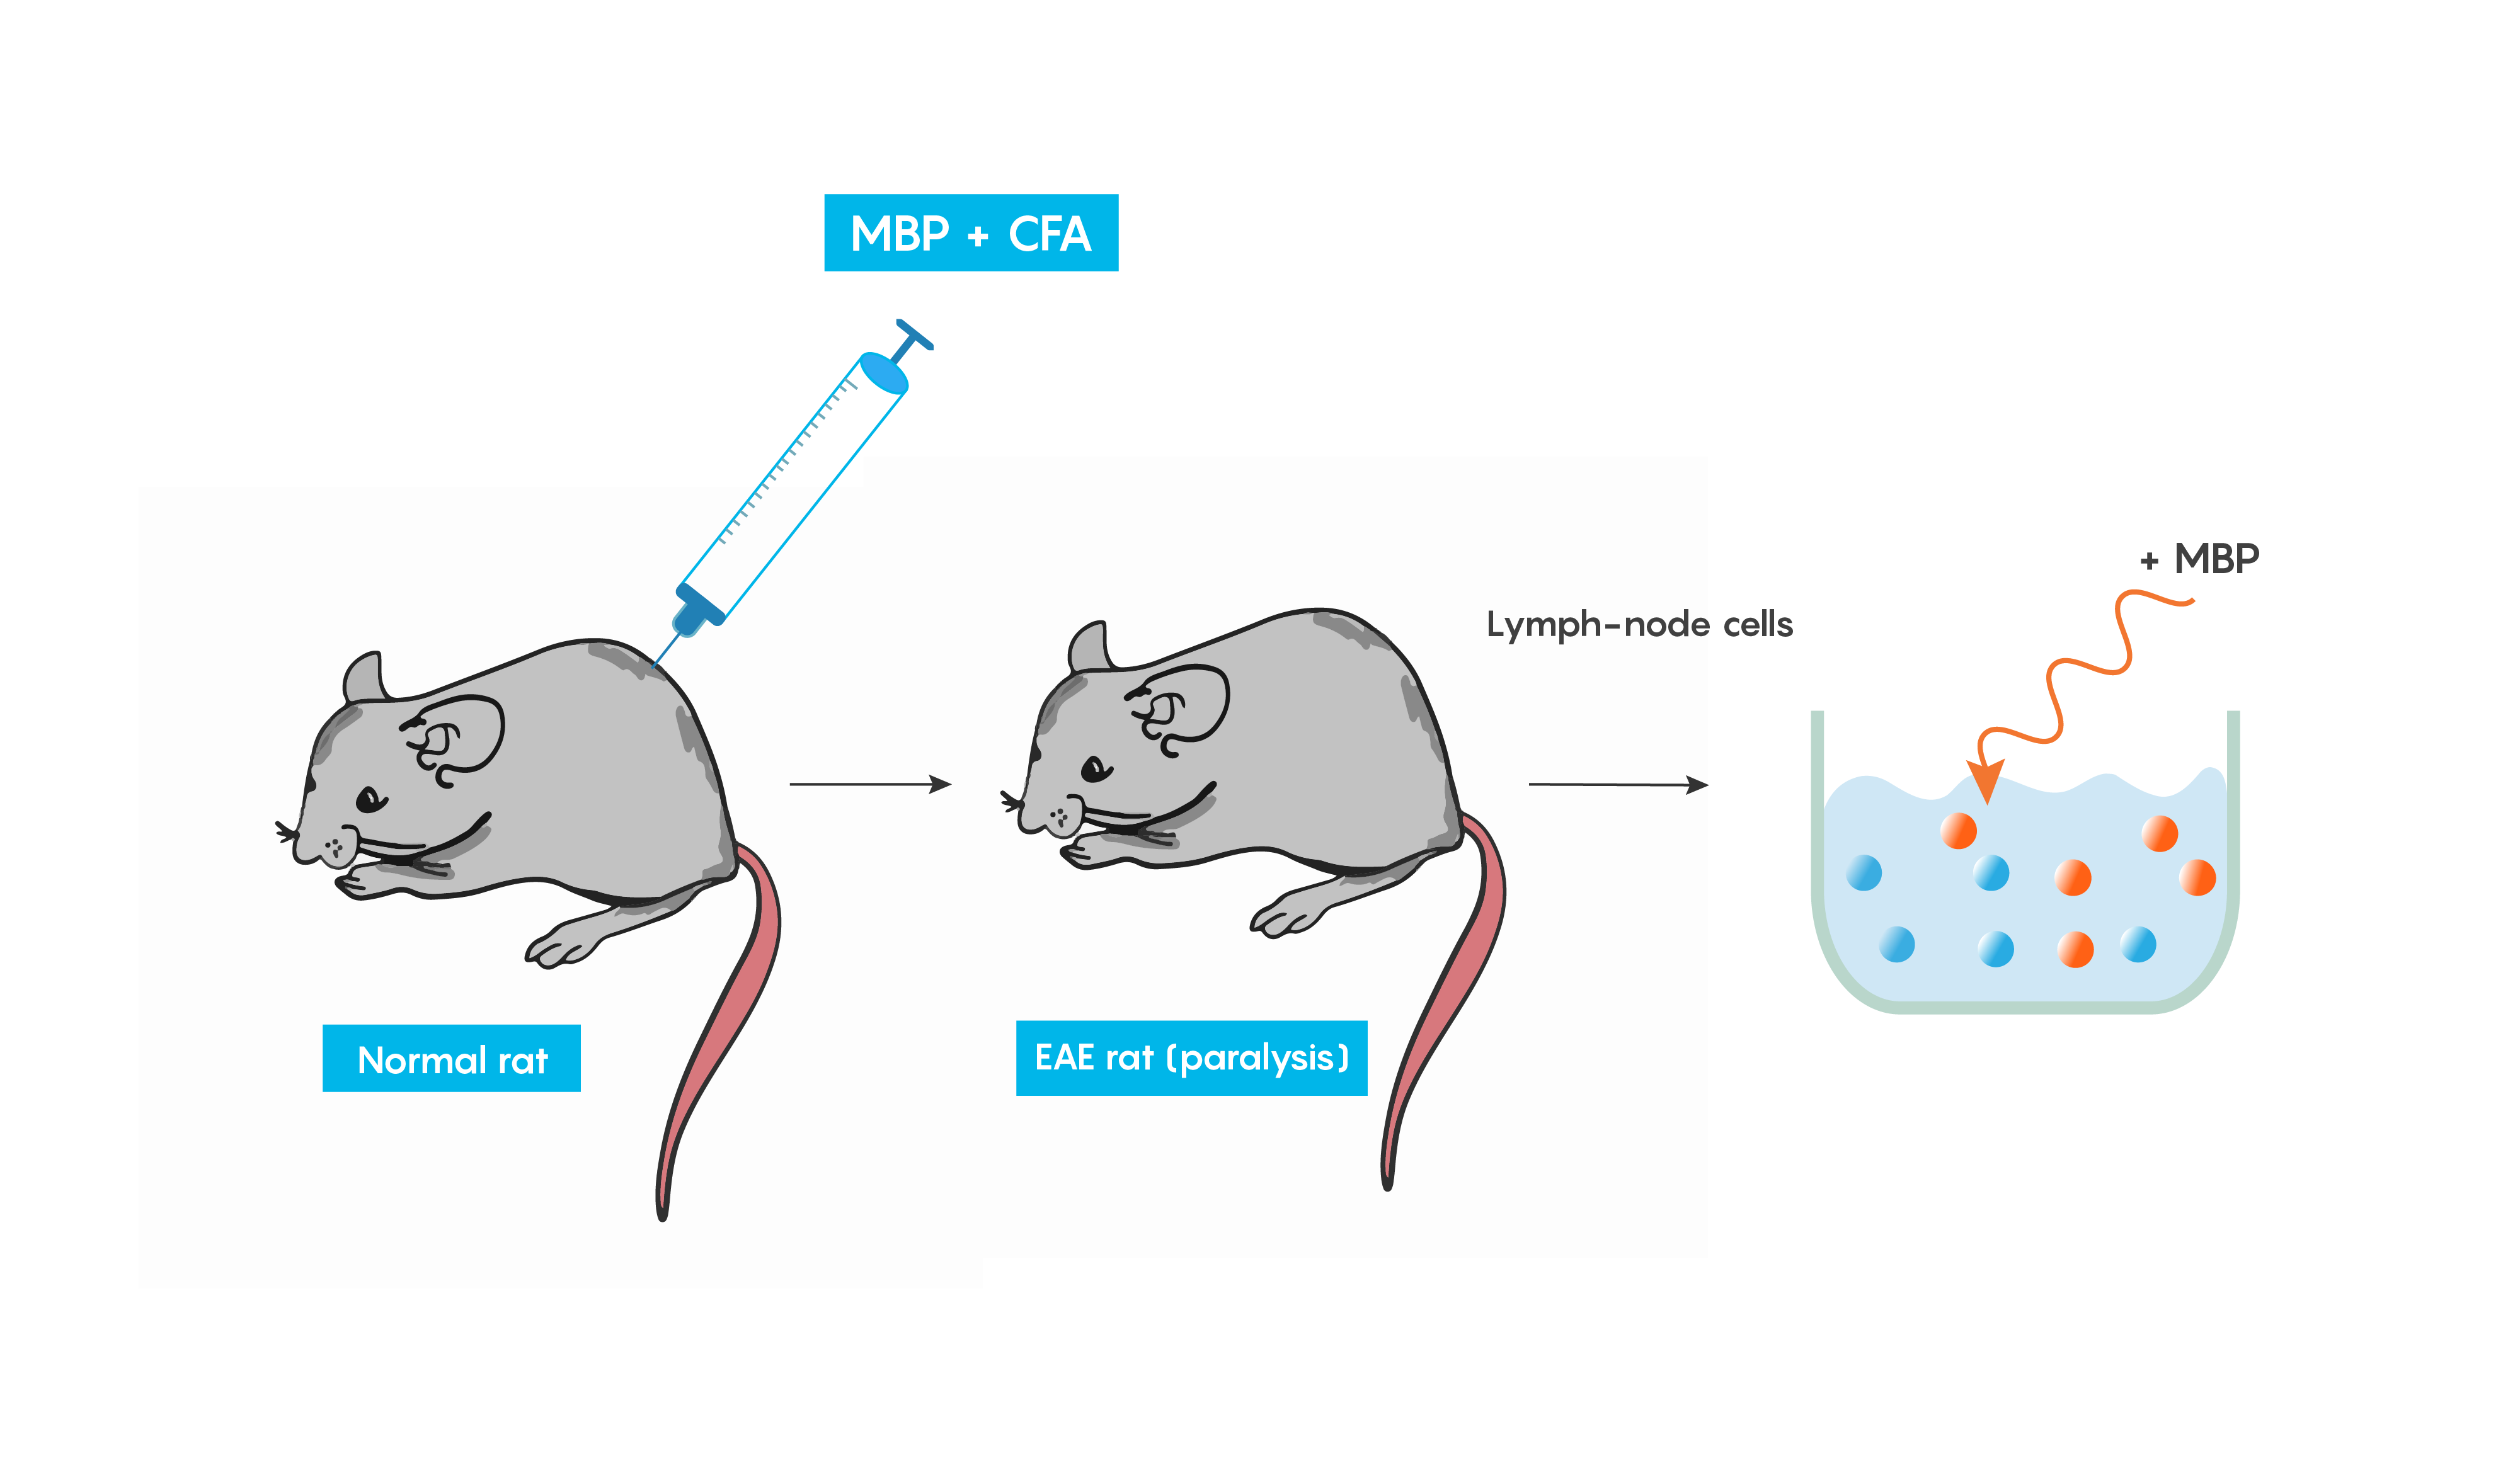 Illustration of the process of inducing an inflammatory response into a mouse to produce EAE as a mdoel of multiple sclerosis.